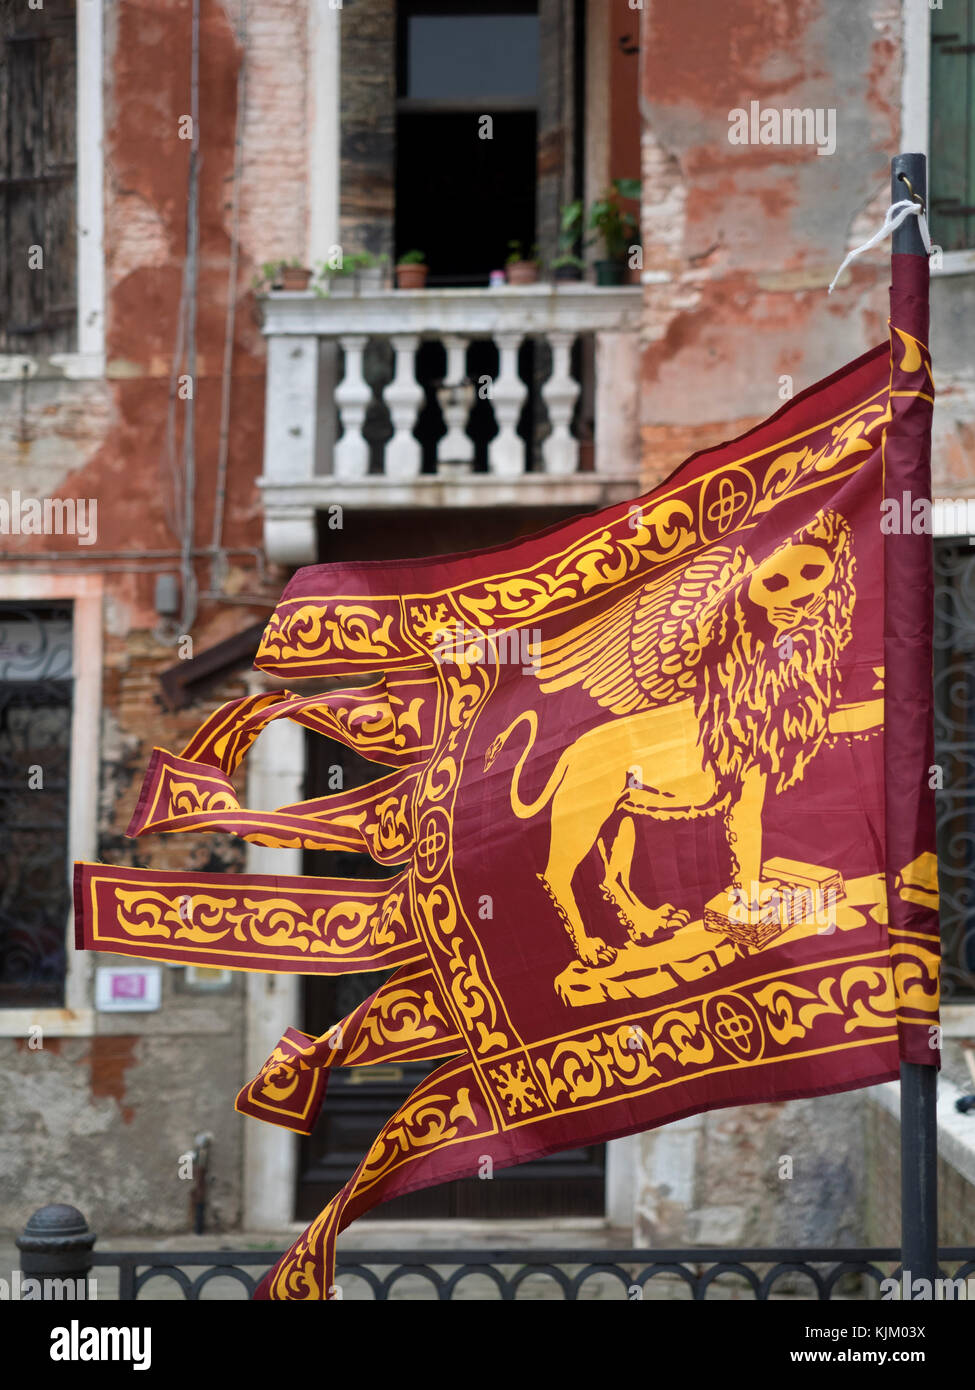 VENICE, ITALY - SEPTEMBER 12, 2017:  The Heraldic Banner Flag of the City of Venice with the City's Winged Lion of St. Marks symbol against background Stock Photo